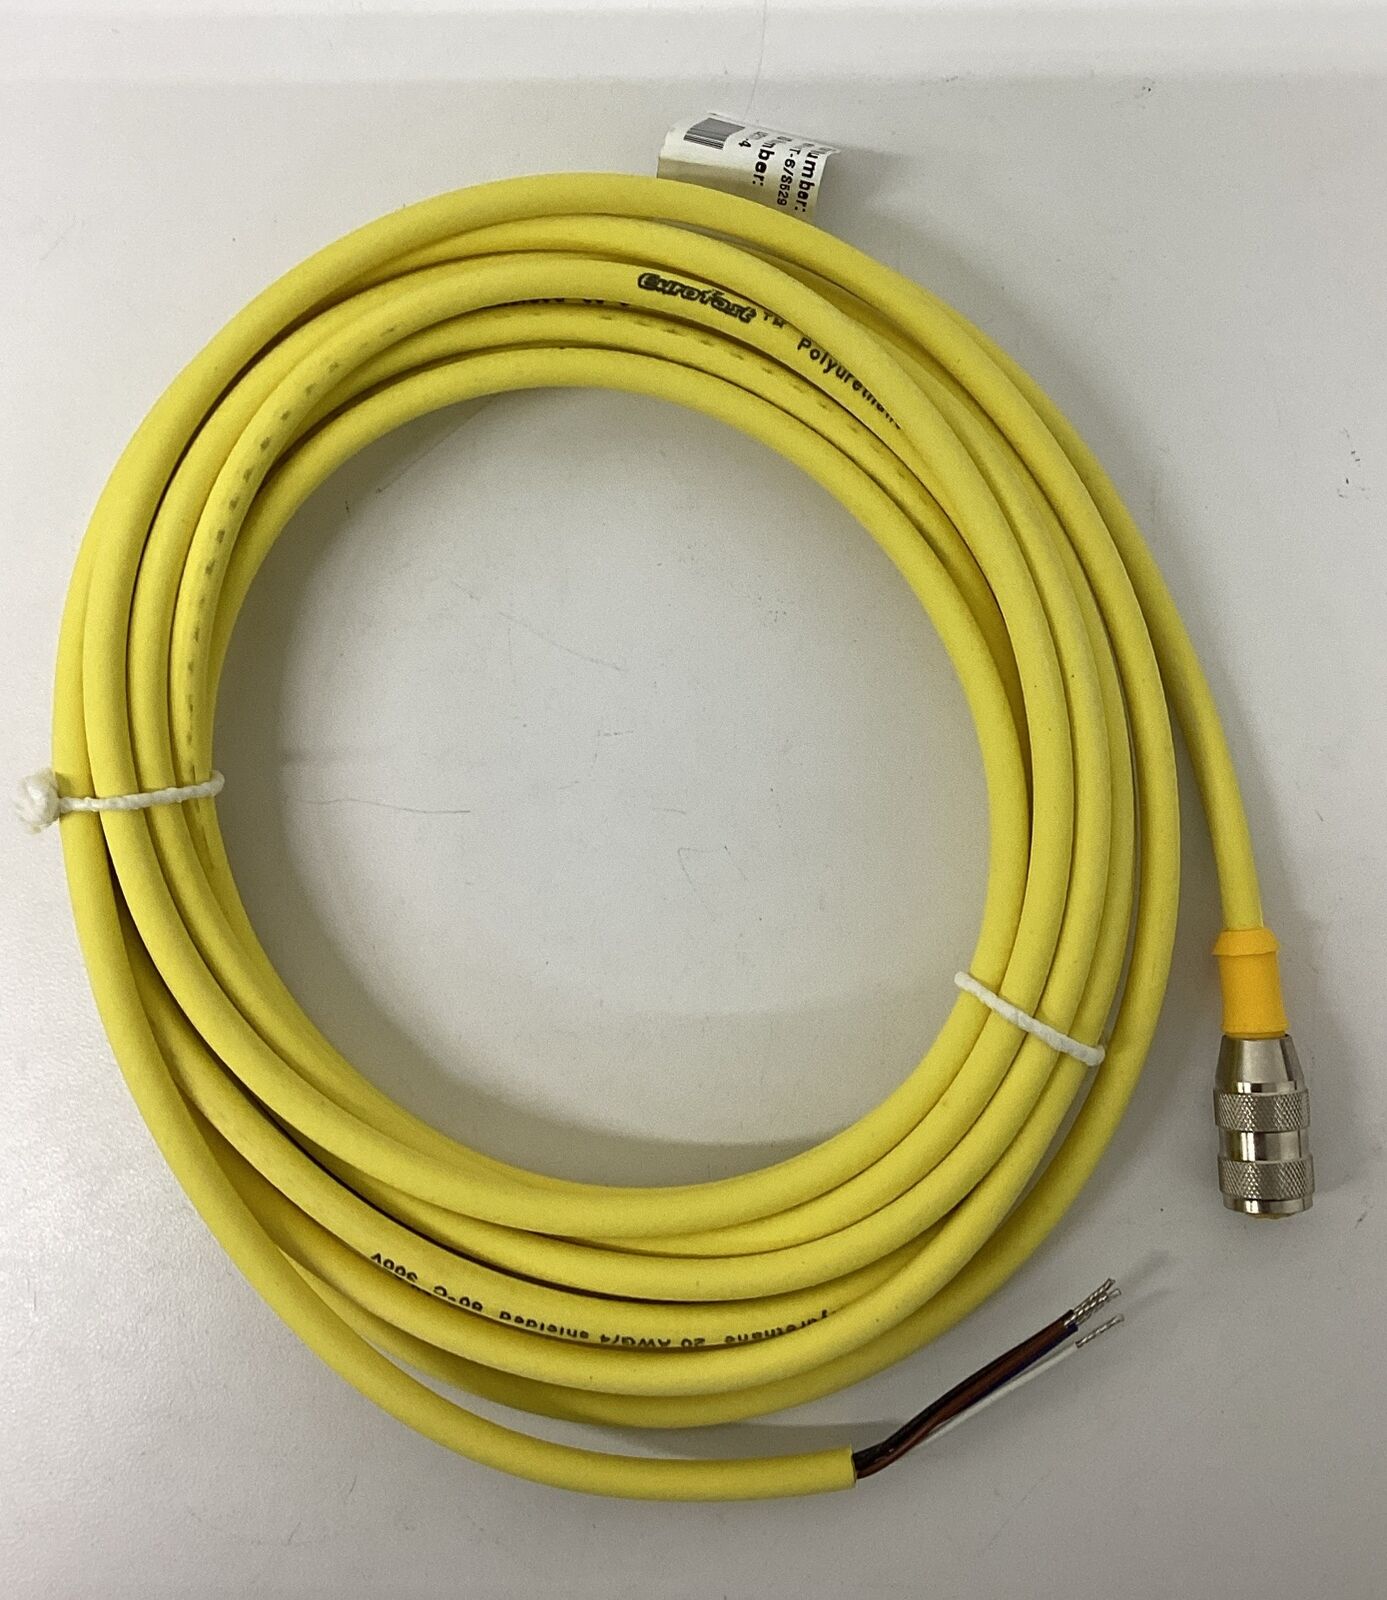 Turck RK4.41T-6/S529 / U2177-4  M12, Male Single End Cable 4-Wire 6M (RE162)